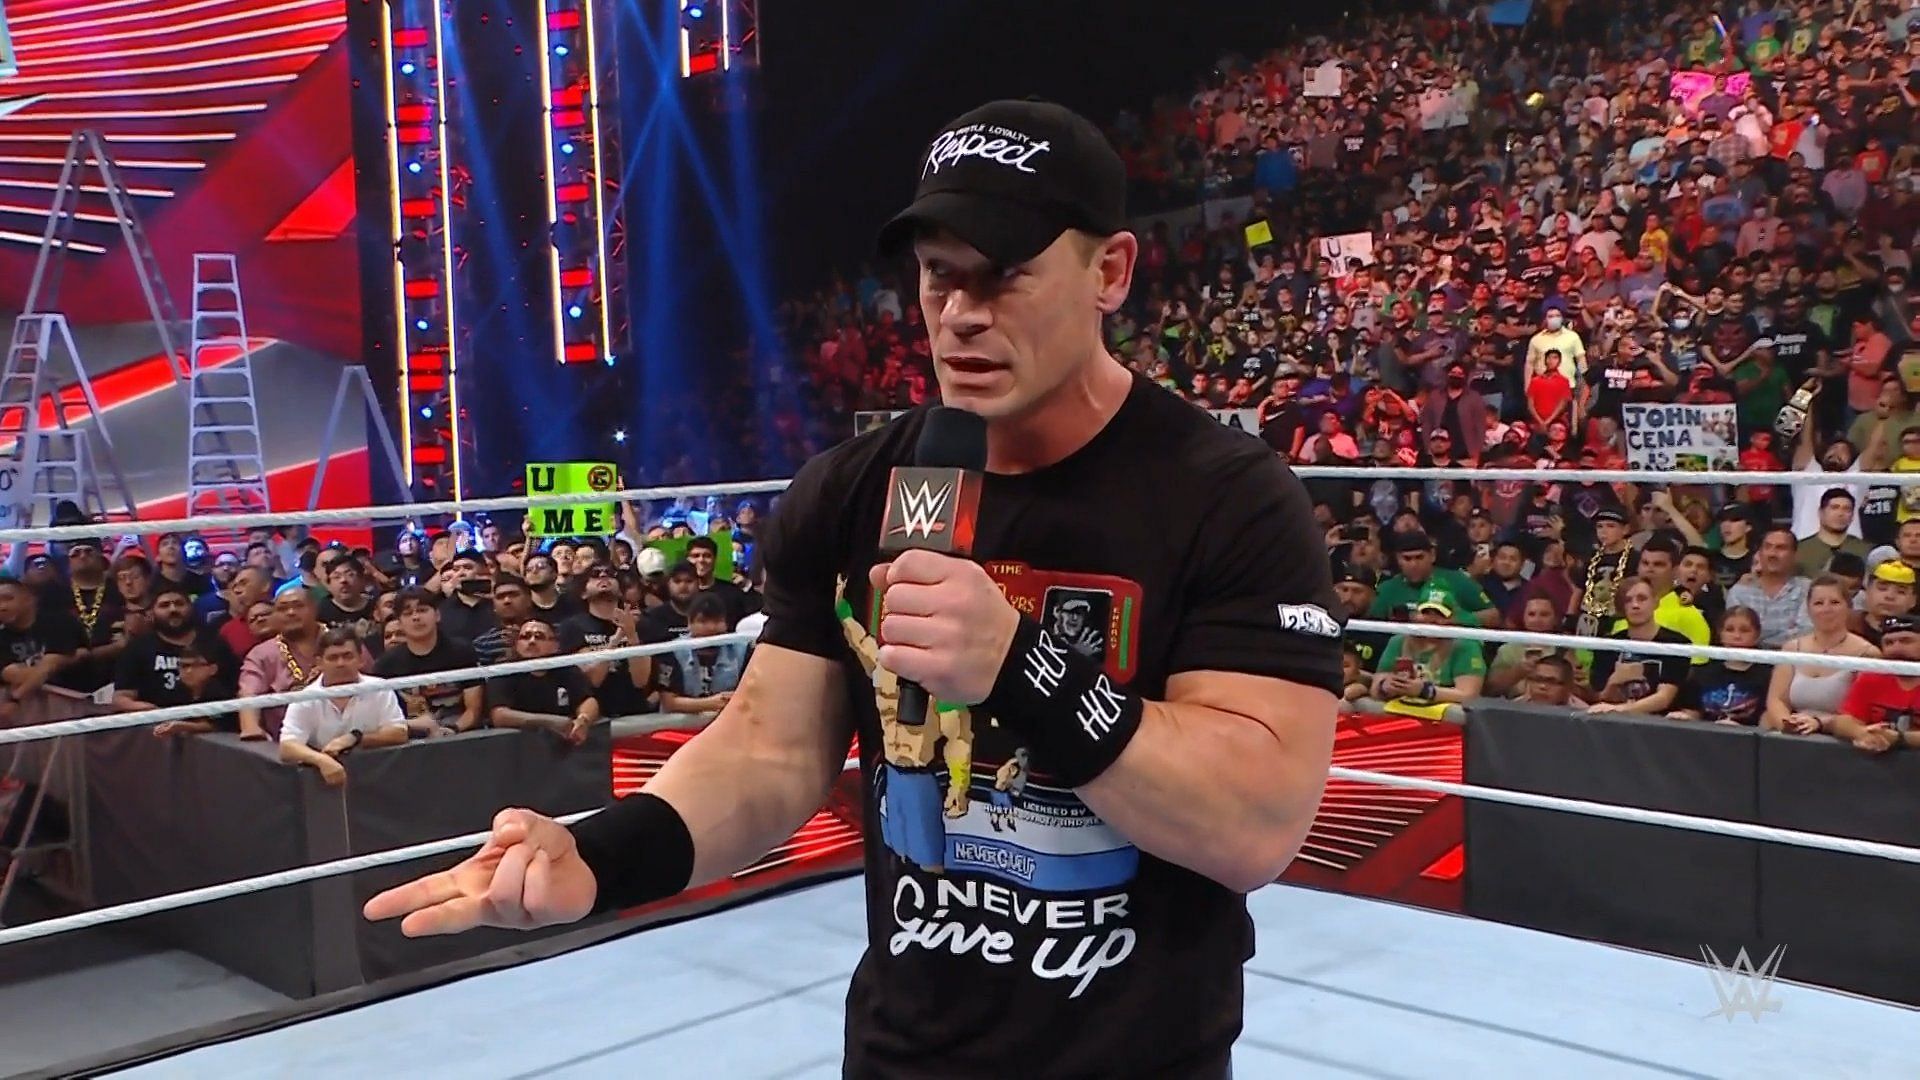 John Cena during his address to fans on RAW on his 20th anniversary